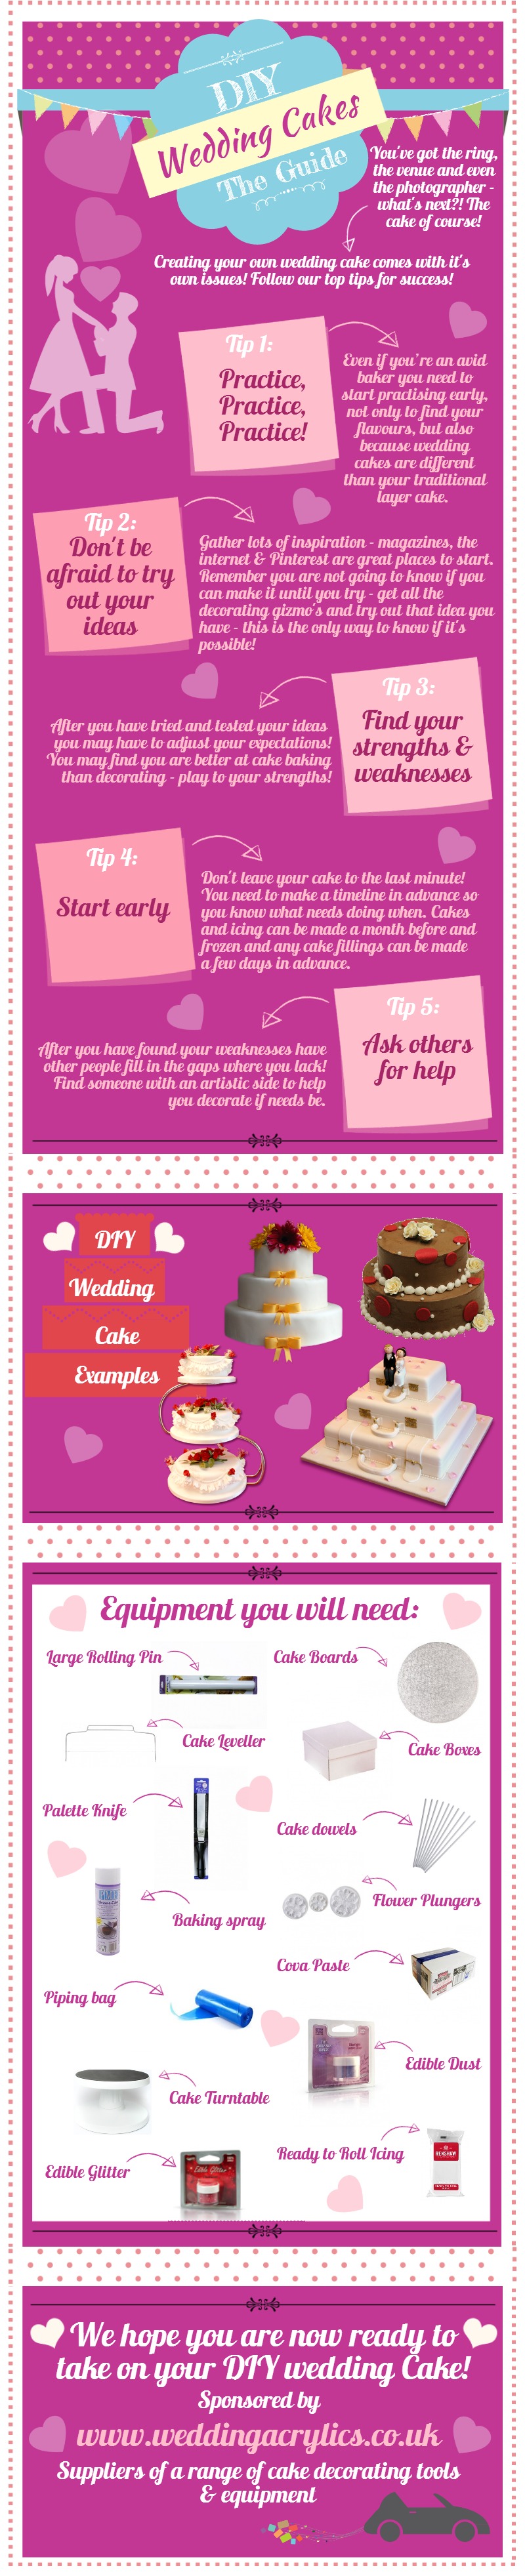 DIY Wedding Cakes - The Guide | Visual.ly